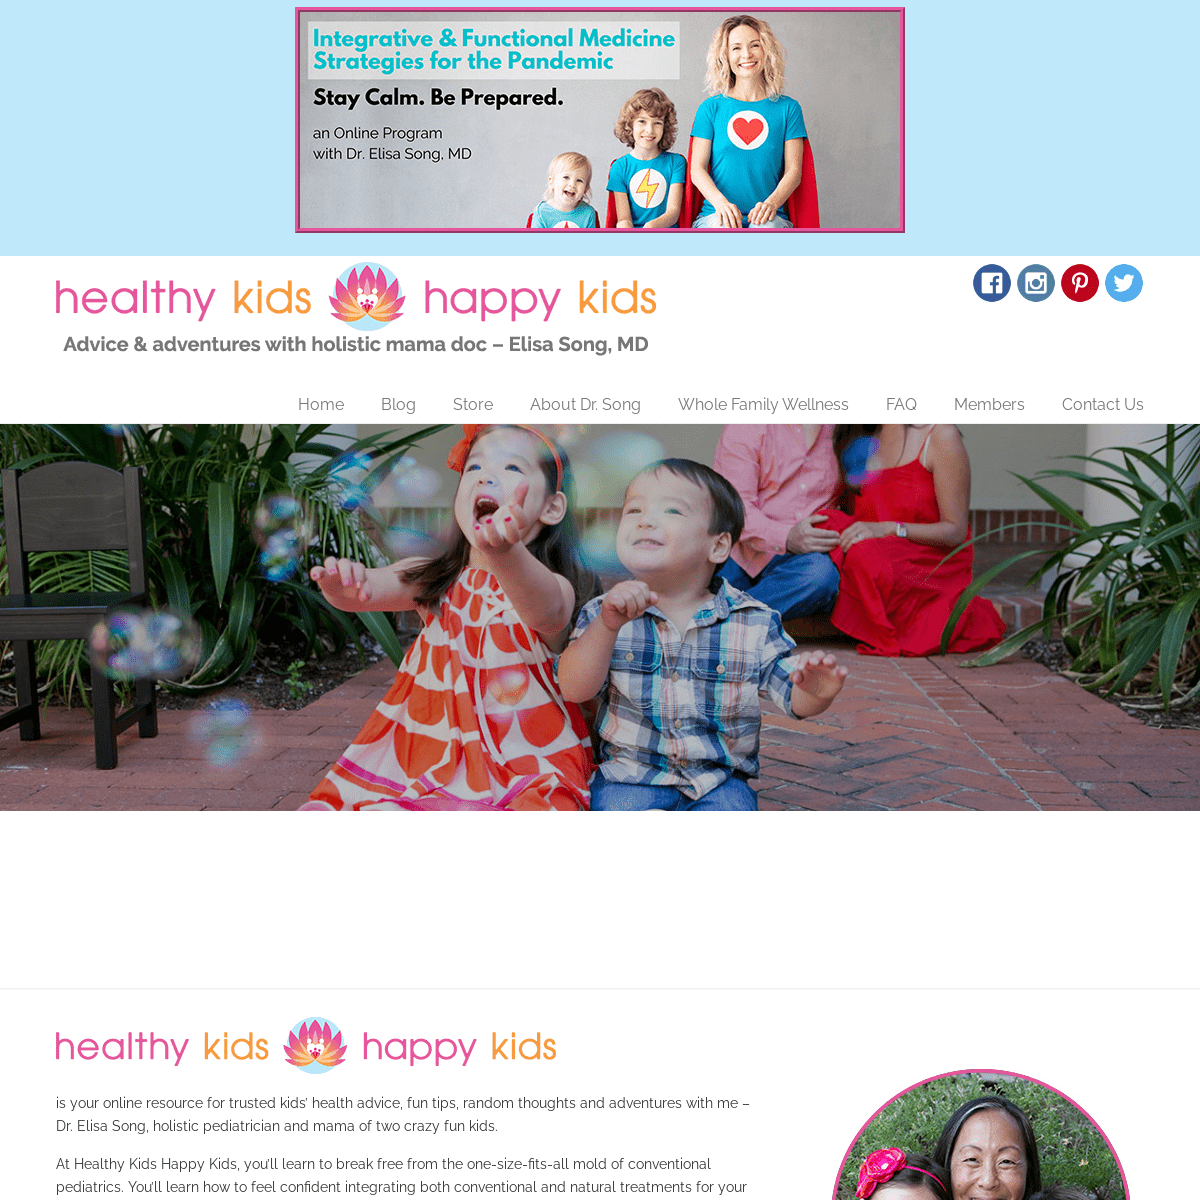 A complete backup of https://healthykidshappykids.com